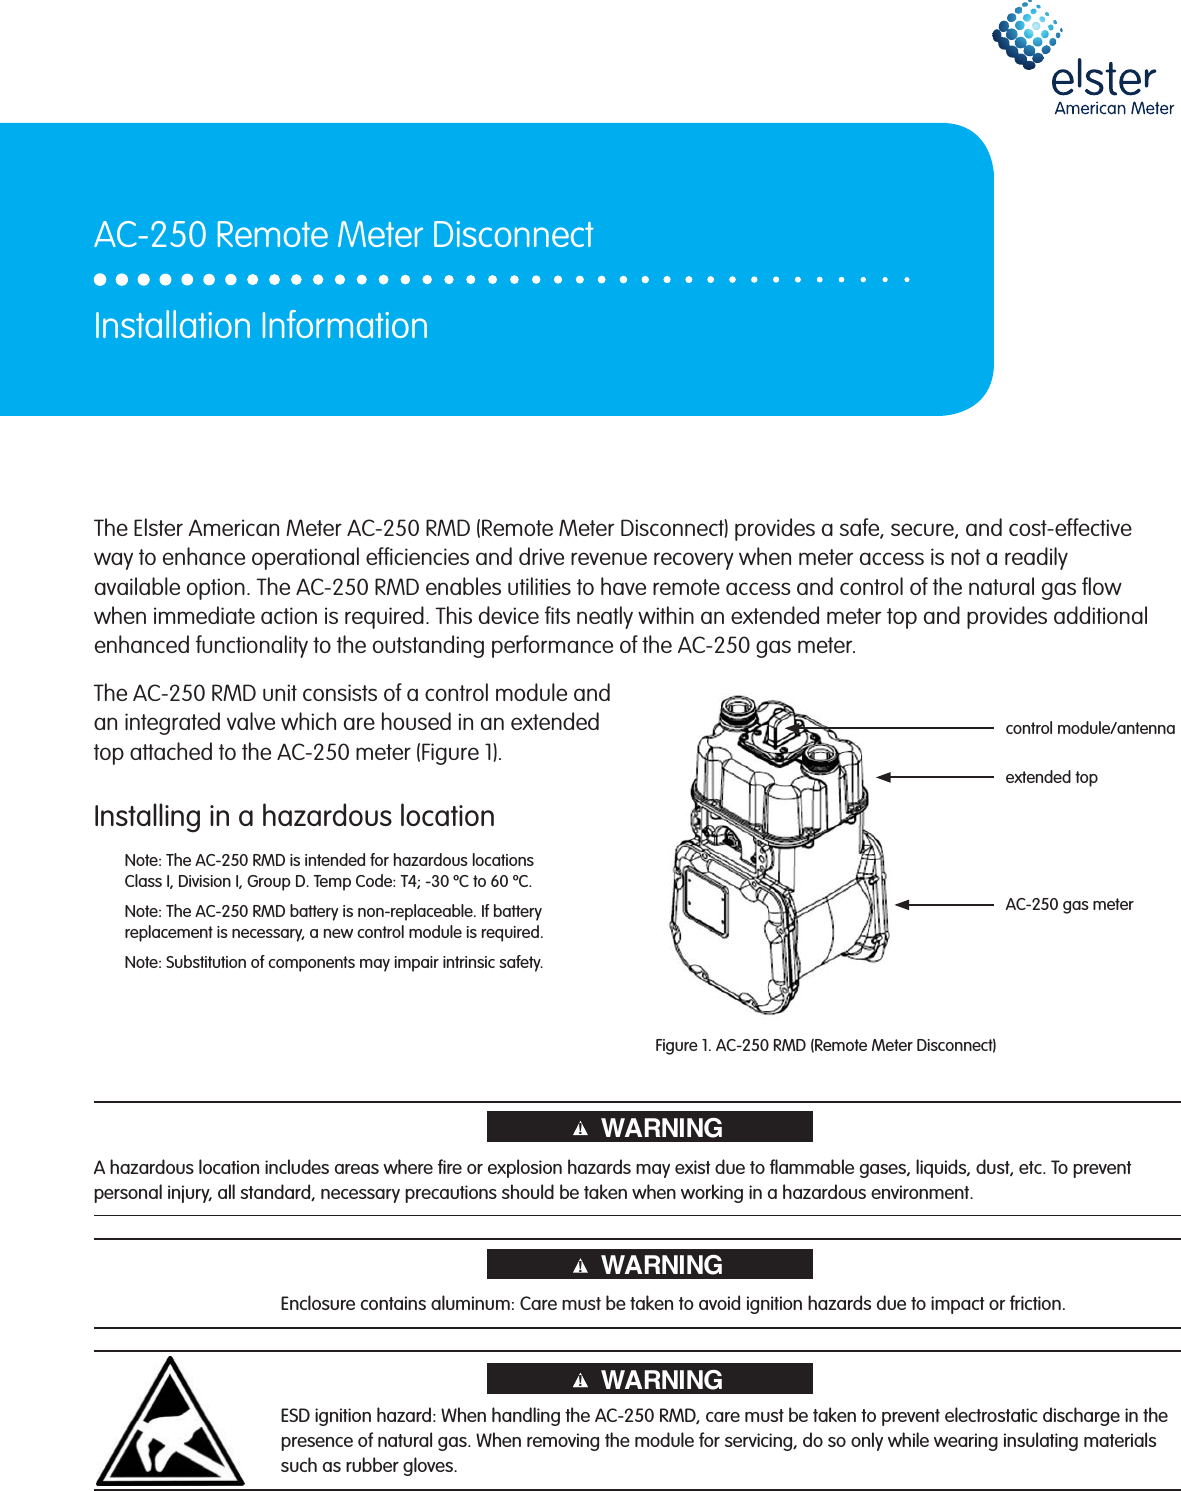 The AC-250 RMD unit consists of a control module and an integrated valve which are housed in an extended top attached to the AC-250 meter (Figure 1).Installing in a hazardous locationNote: The AC-250 RMD is intended for hazardous locations  Class I, Division I, Group D. Temp Code: T4; -30 ºC to 60 ºC.Note: The AC-250 RMD battery is non-replaceable. If battery replacement is necessary, a new control module is required.Note: Substitution of components may impair intrinsic safety.Figure 1. AC-250 RMD (Remote Meter Disconnect)The Elster American Meter AC-250 RMD (Remote Meter Disconnect) provides a safe, secure, and cost-effective way to enhance operational efciencies and drive revenue recovery when meter access is not a readily available option. The AC-250 RMD enables utilities to have remote access and control of the natural gas ow when immediate action is required. This device ts neatly within an extended meter top and provides additional enhanced functionality to the outstanding performance of the AC-250 gas meter.AC-250 Remote Meter DisconnectInstallation Informationcontrol module/antennaextended topAC-250 gas meterWARNING!A hazardous location includes areas where re or explosion hazards may exist due to ammable gases, liquids, dust, etc. To prevent personal injury, all standard, necessary precautions should be taken when working in a hazardous environment.Enclosure contains aluminum: Care must be taken to avoid ignition hazards due to impact or friction.ESD ignition hazard: When handling the AC-250 RMD, care must be taken to prevent electrostatic discharge in the presence of natural gas. When removing the module for servicing, do so only while wearing insulating materials such as rubber gloves.!WARNING!WARNING!